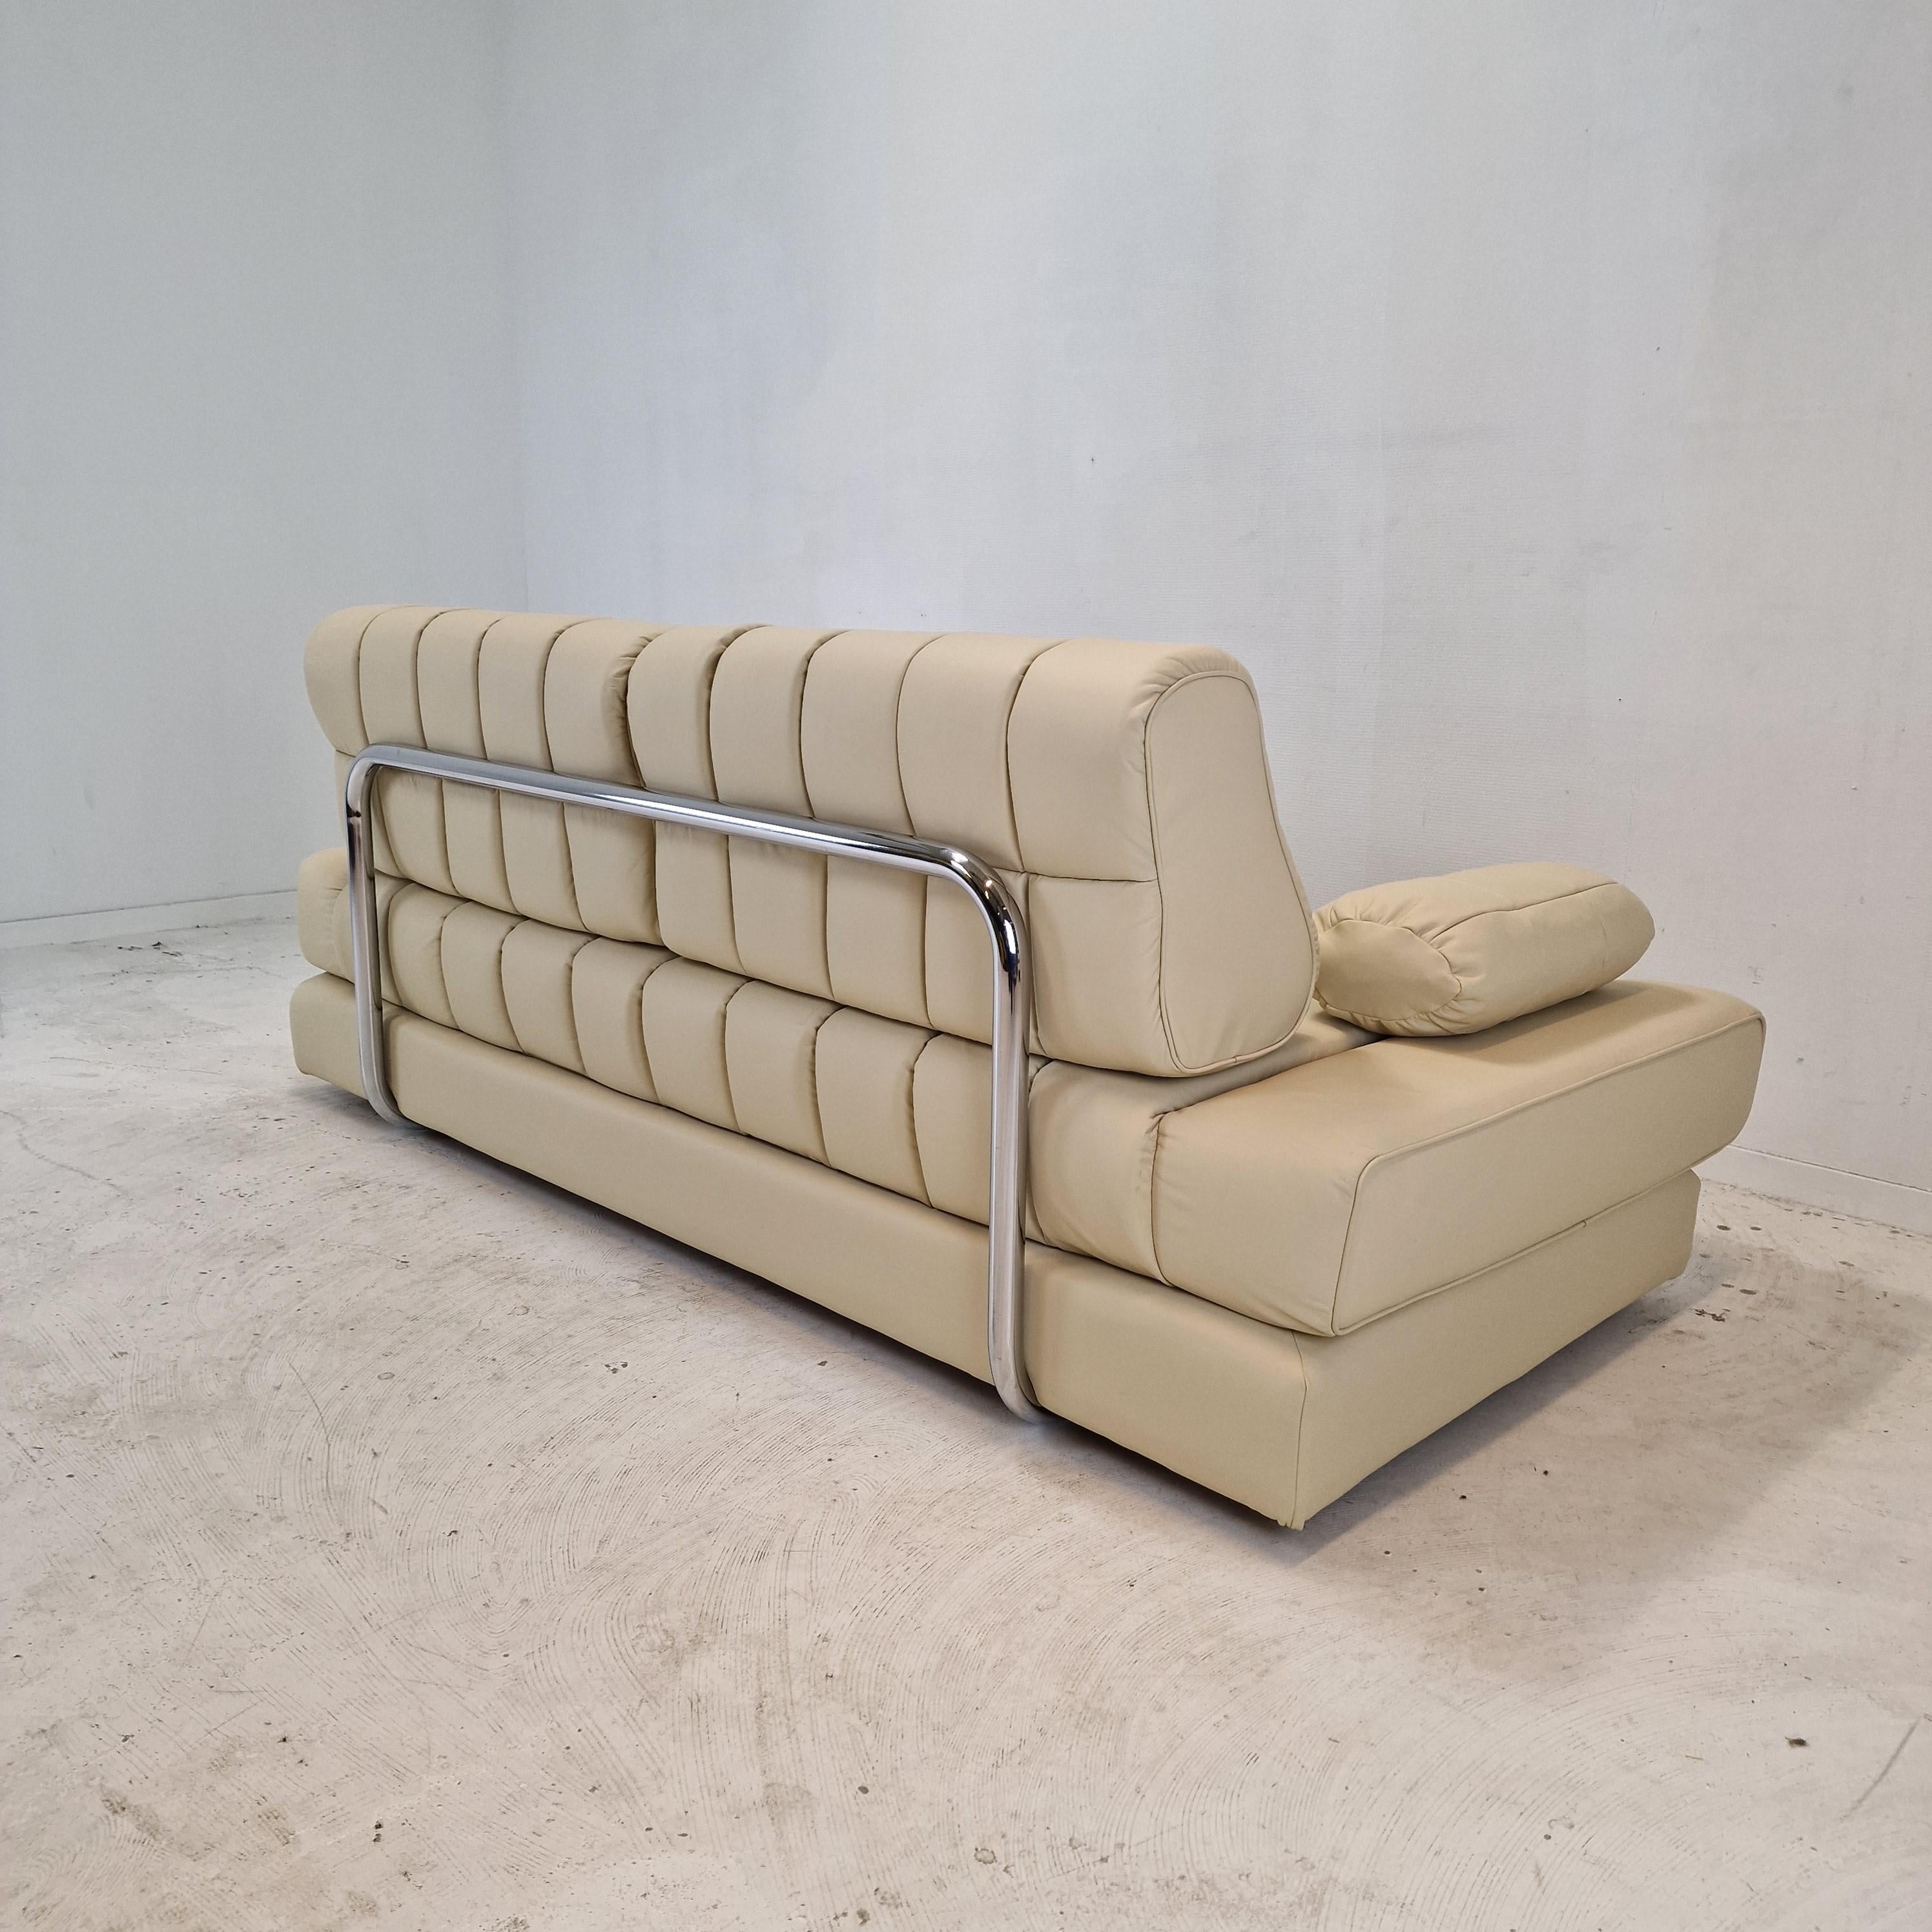 DS-85 Sofa or Daybed by De Sede, Switzerland 1970s For Sale 13